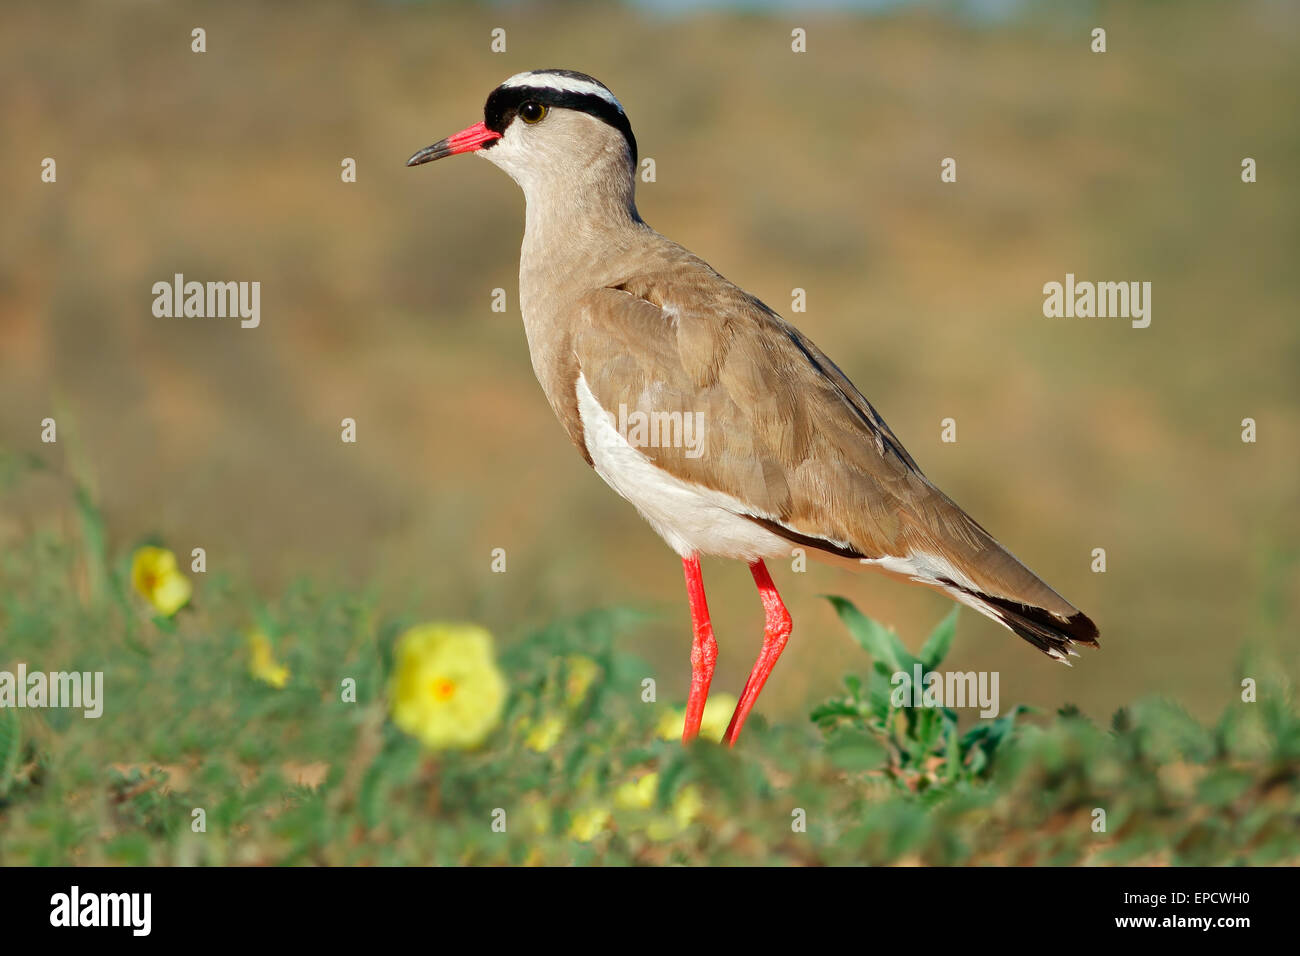 A crowned plover (Vanellus coronatus) in natural habitat, South Africa Stock Photo